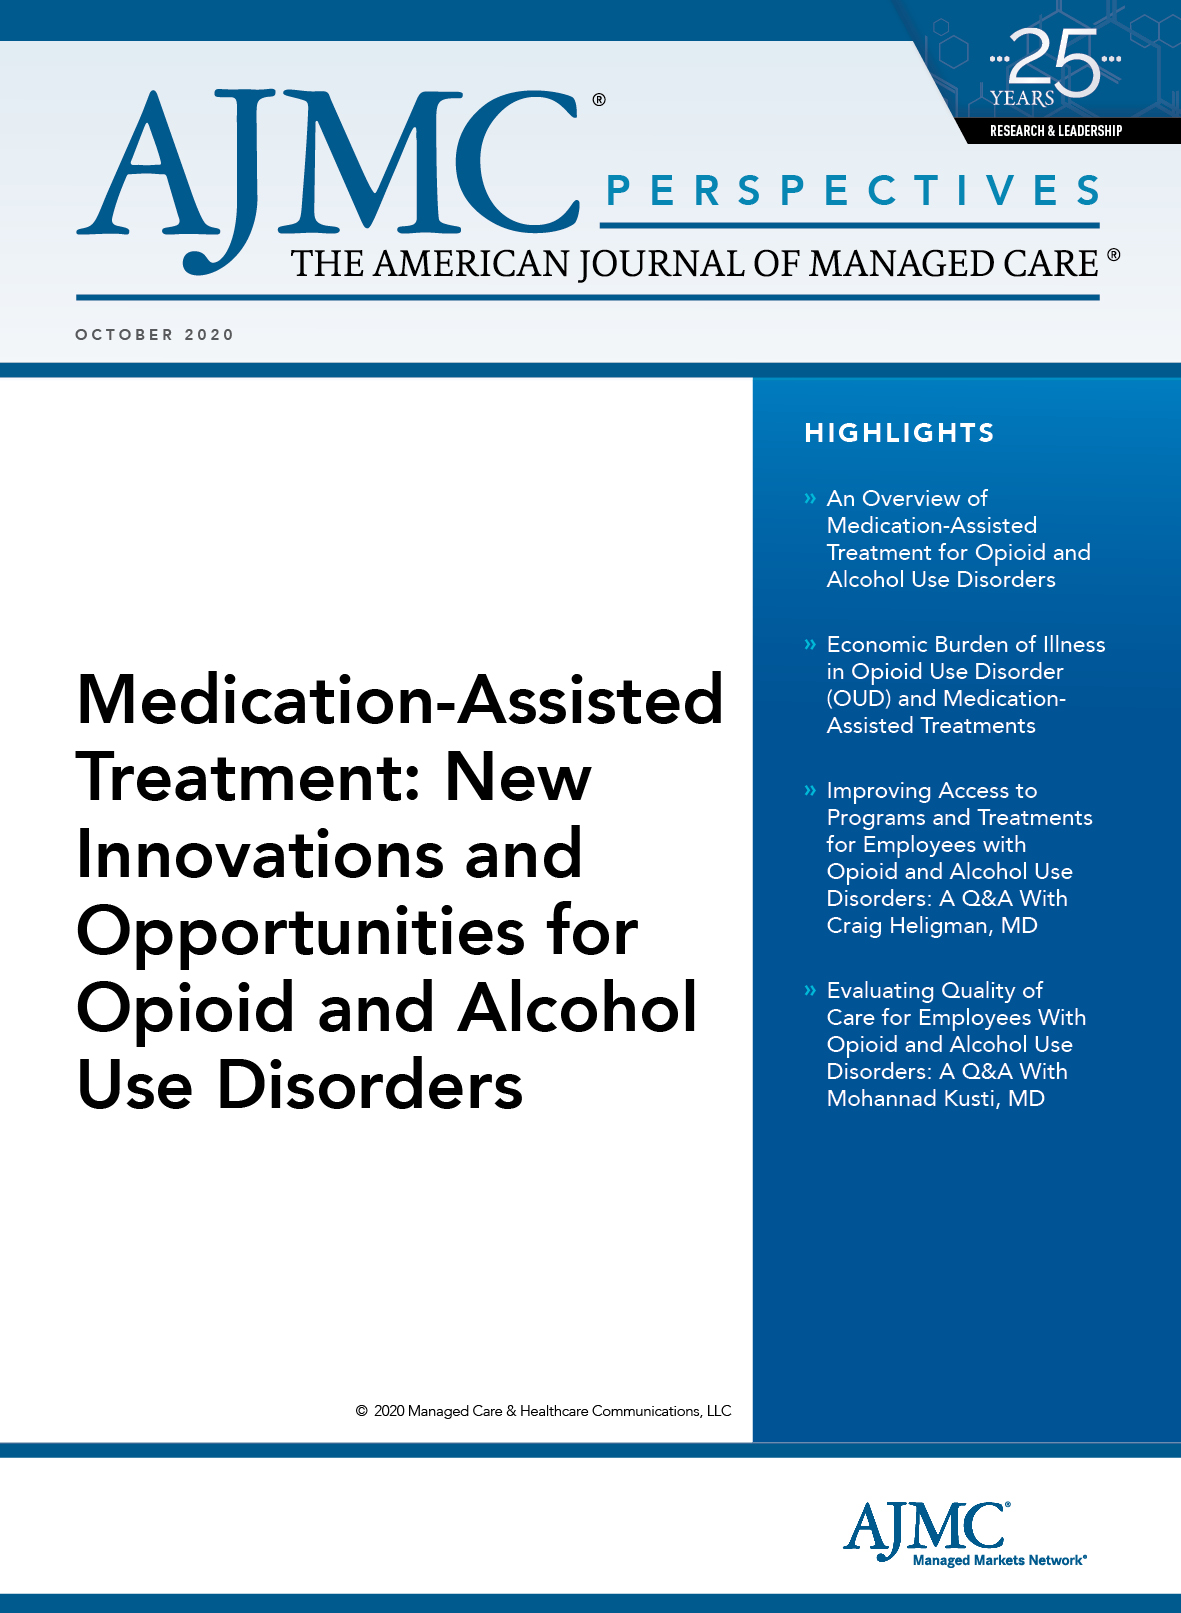 Medication-Assisted Treatment: New Innovations and Opportunities for Opioid and Alcohol Use Disorders